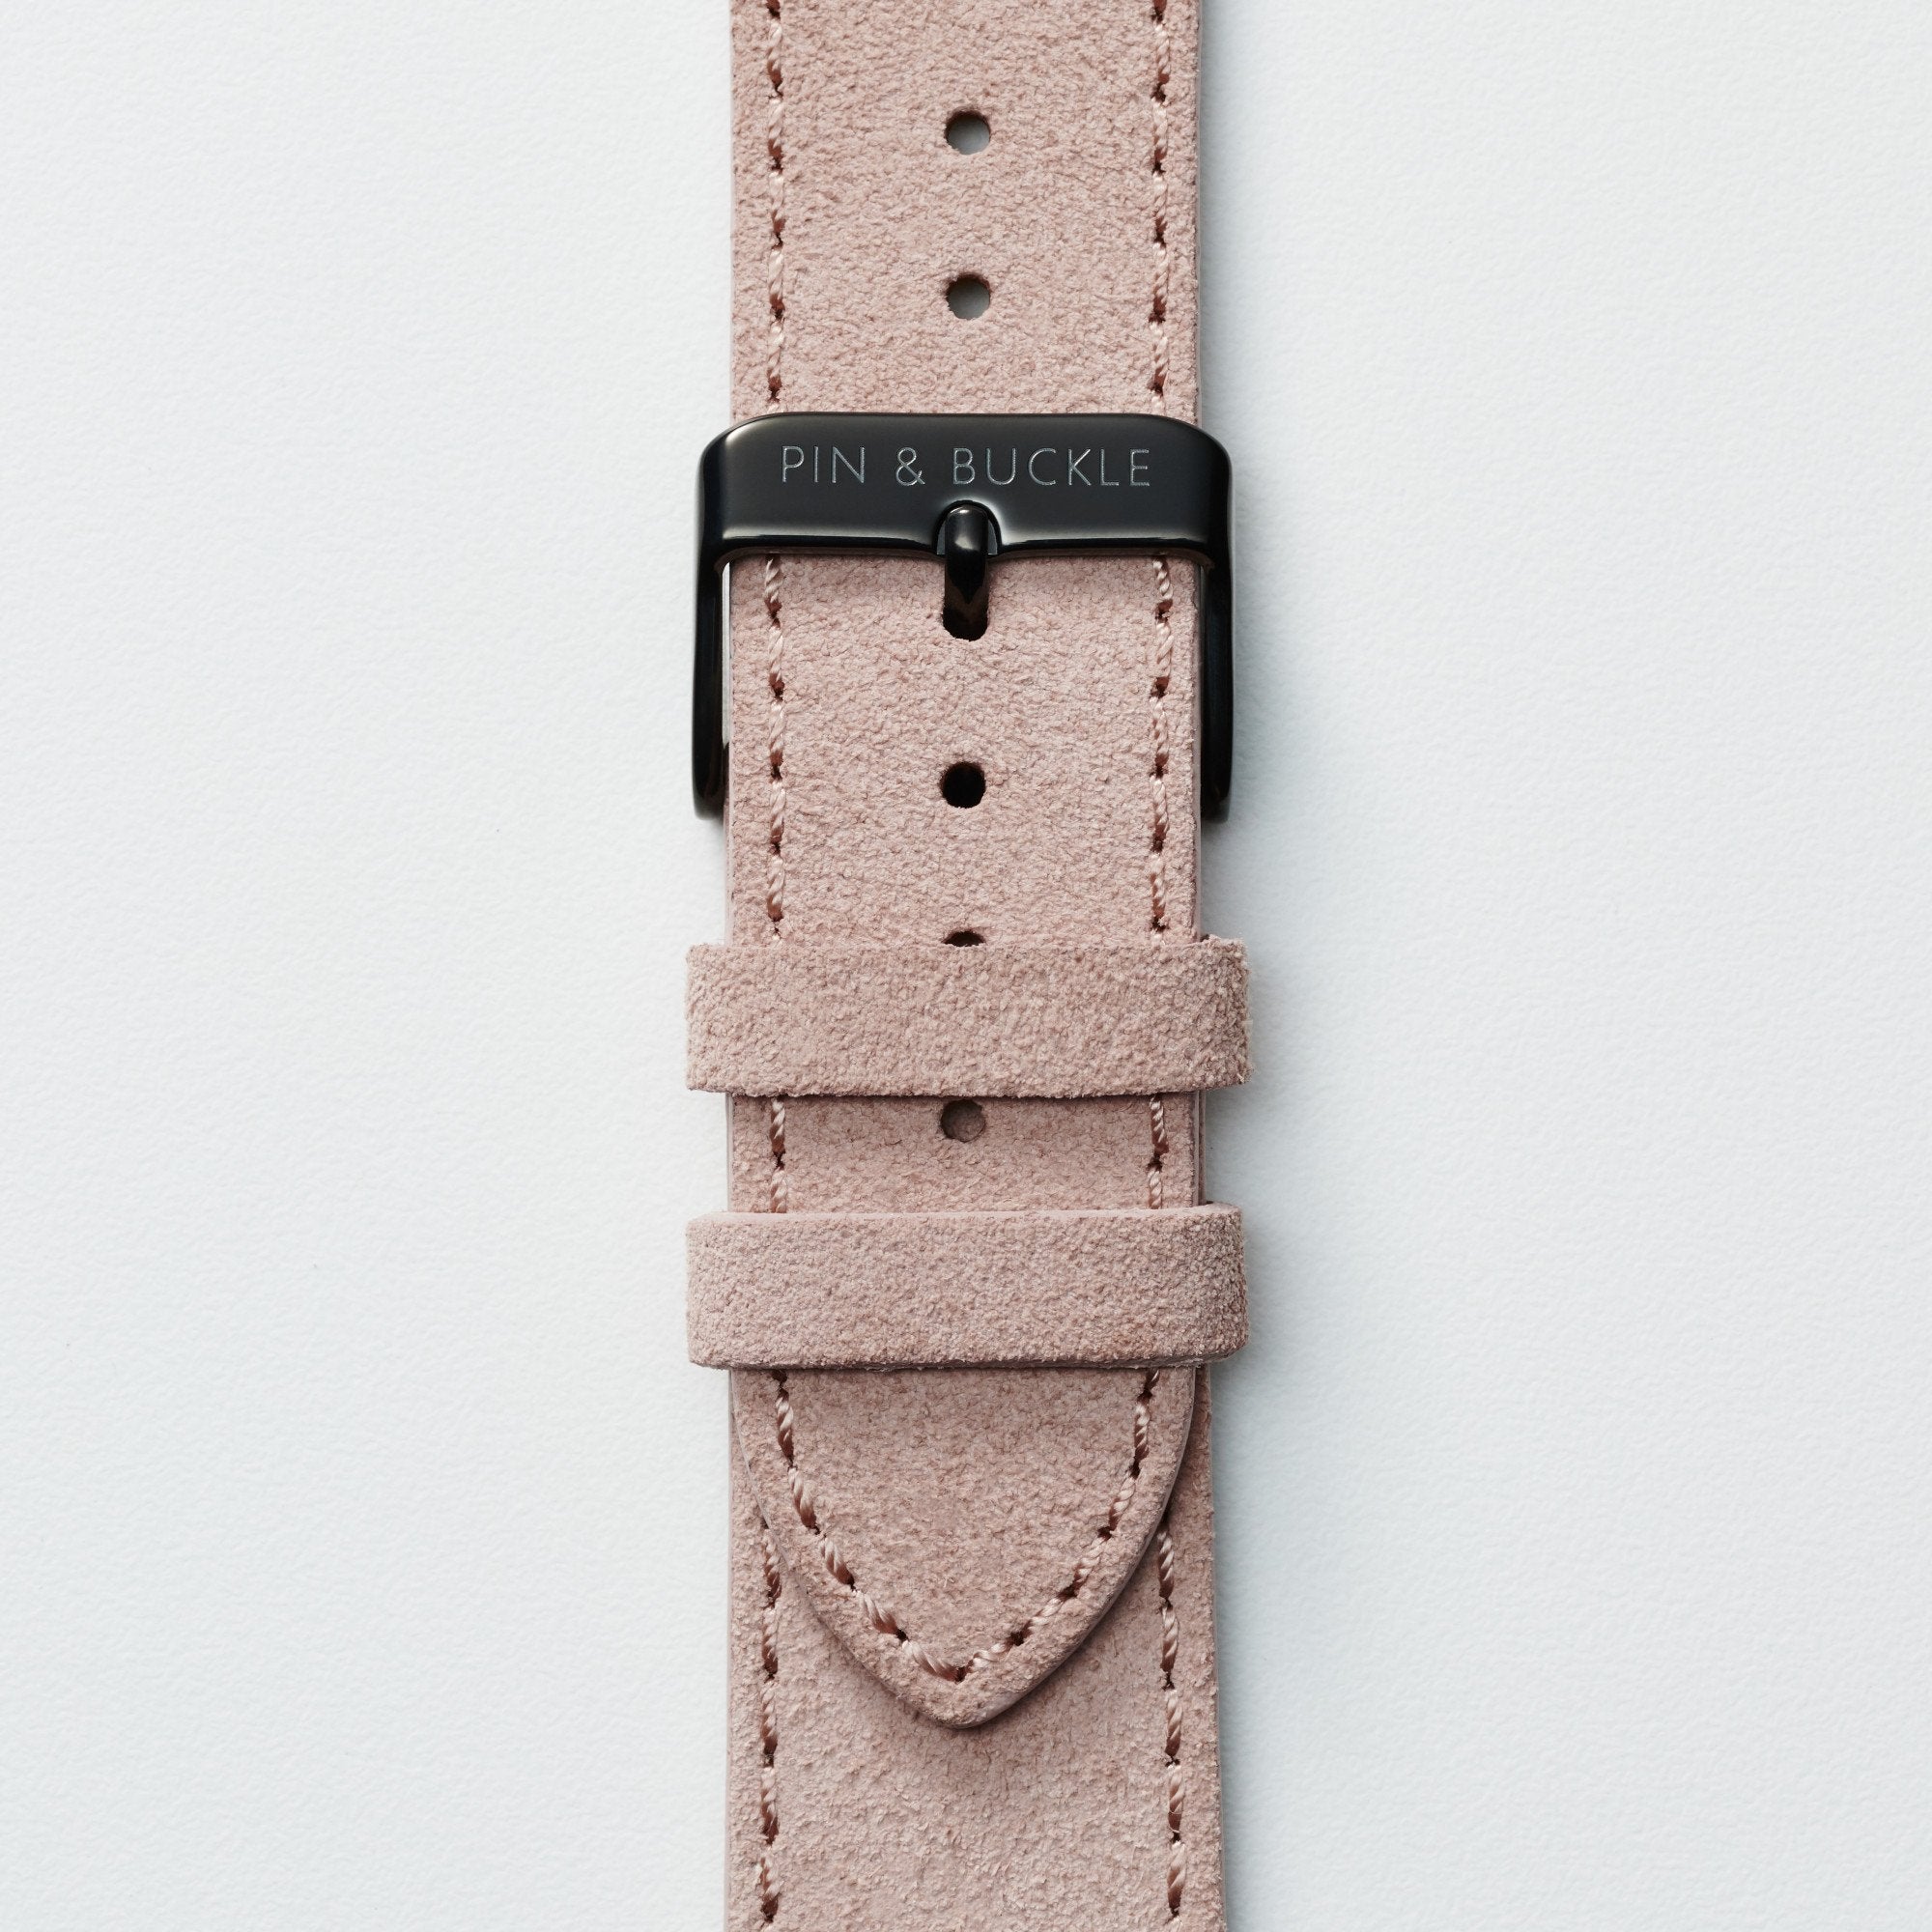 Pin and Buckle Apple Watch Bands - Velour - Suede Leather Apple Watch Band - Peach - Black